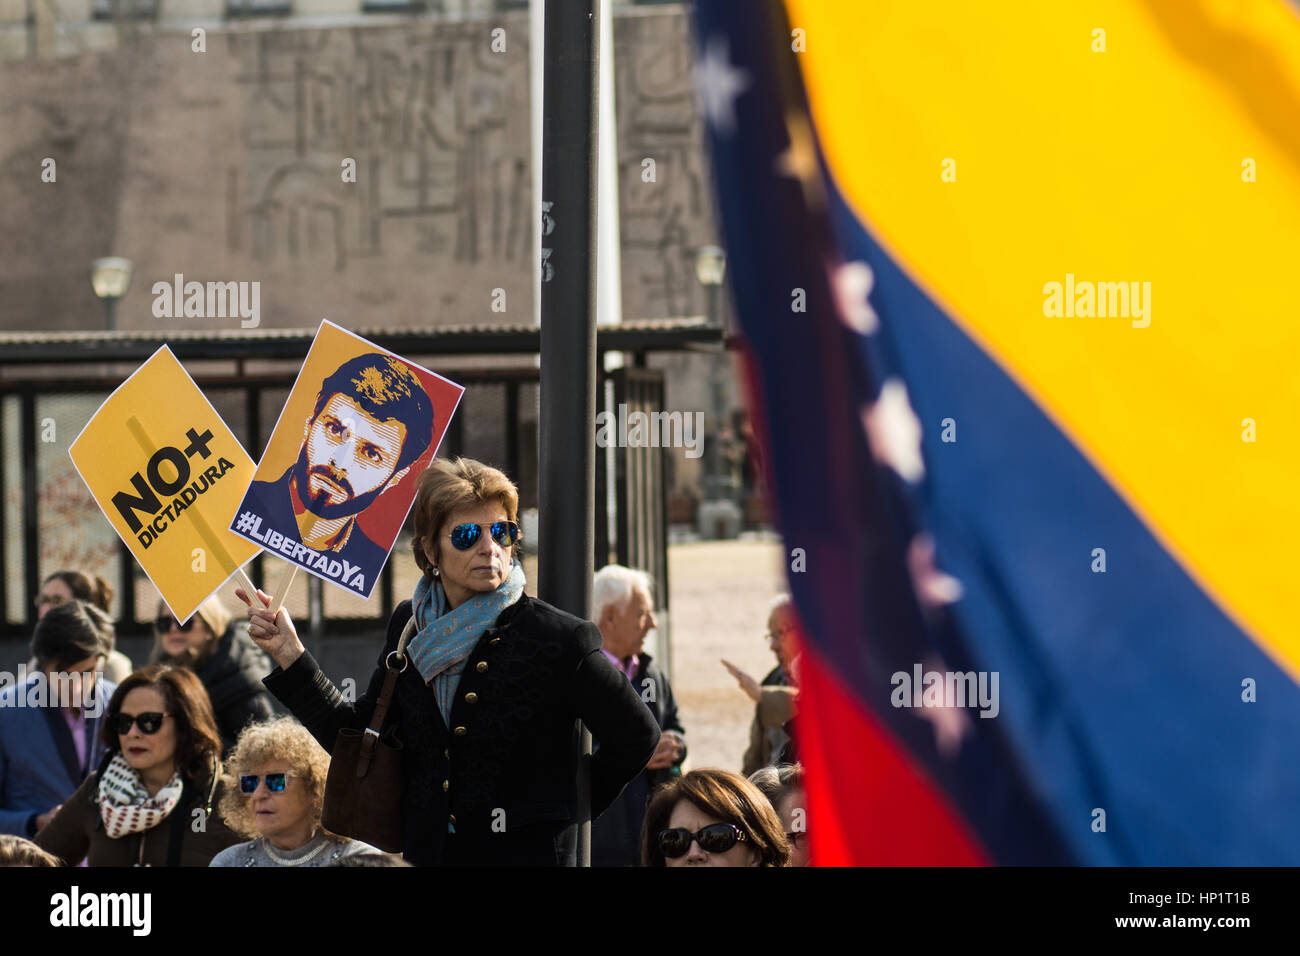 Madrid, Spain. 18th Feb, 2017. A woman holds a picture of Leopoldo Lopez during a protest demanding the release of political prisoners Credit: Marcos del Mazo/Alamy Live News Stock Photo